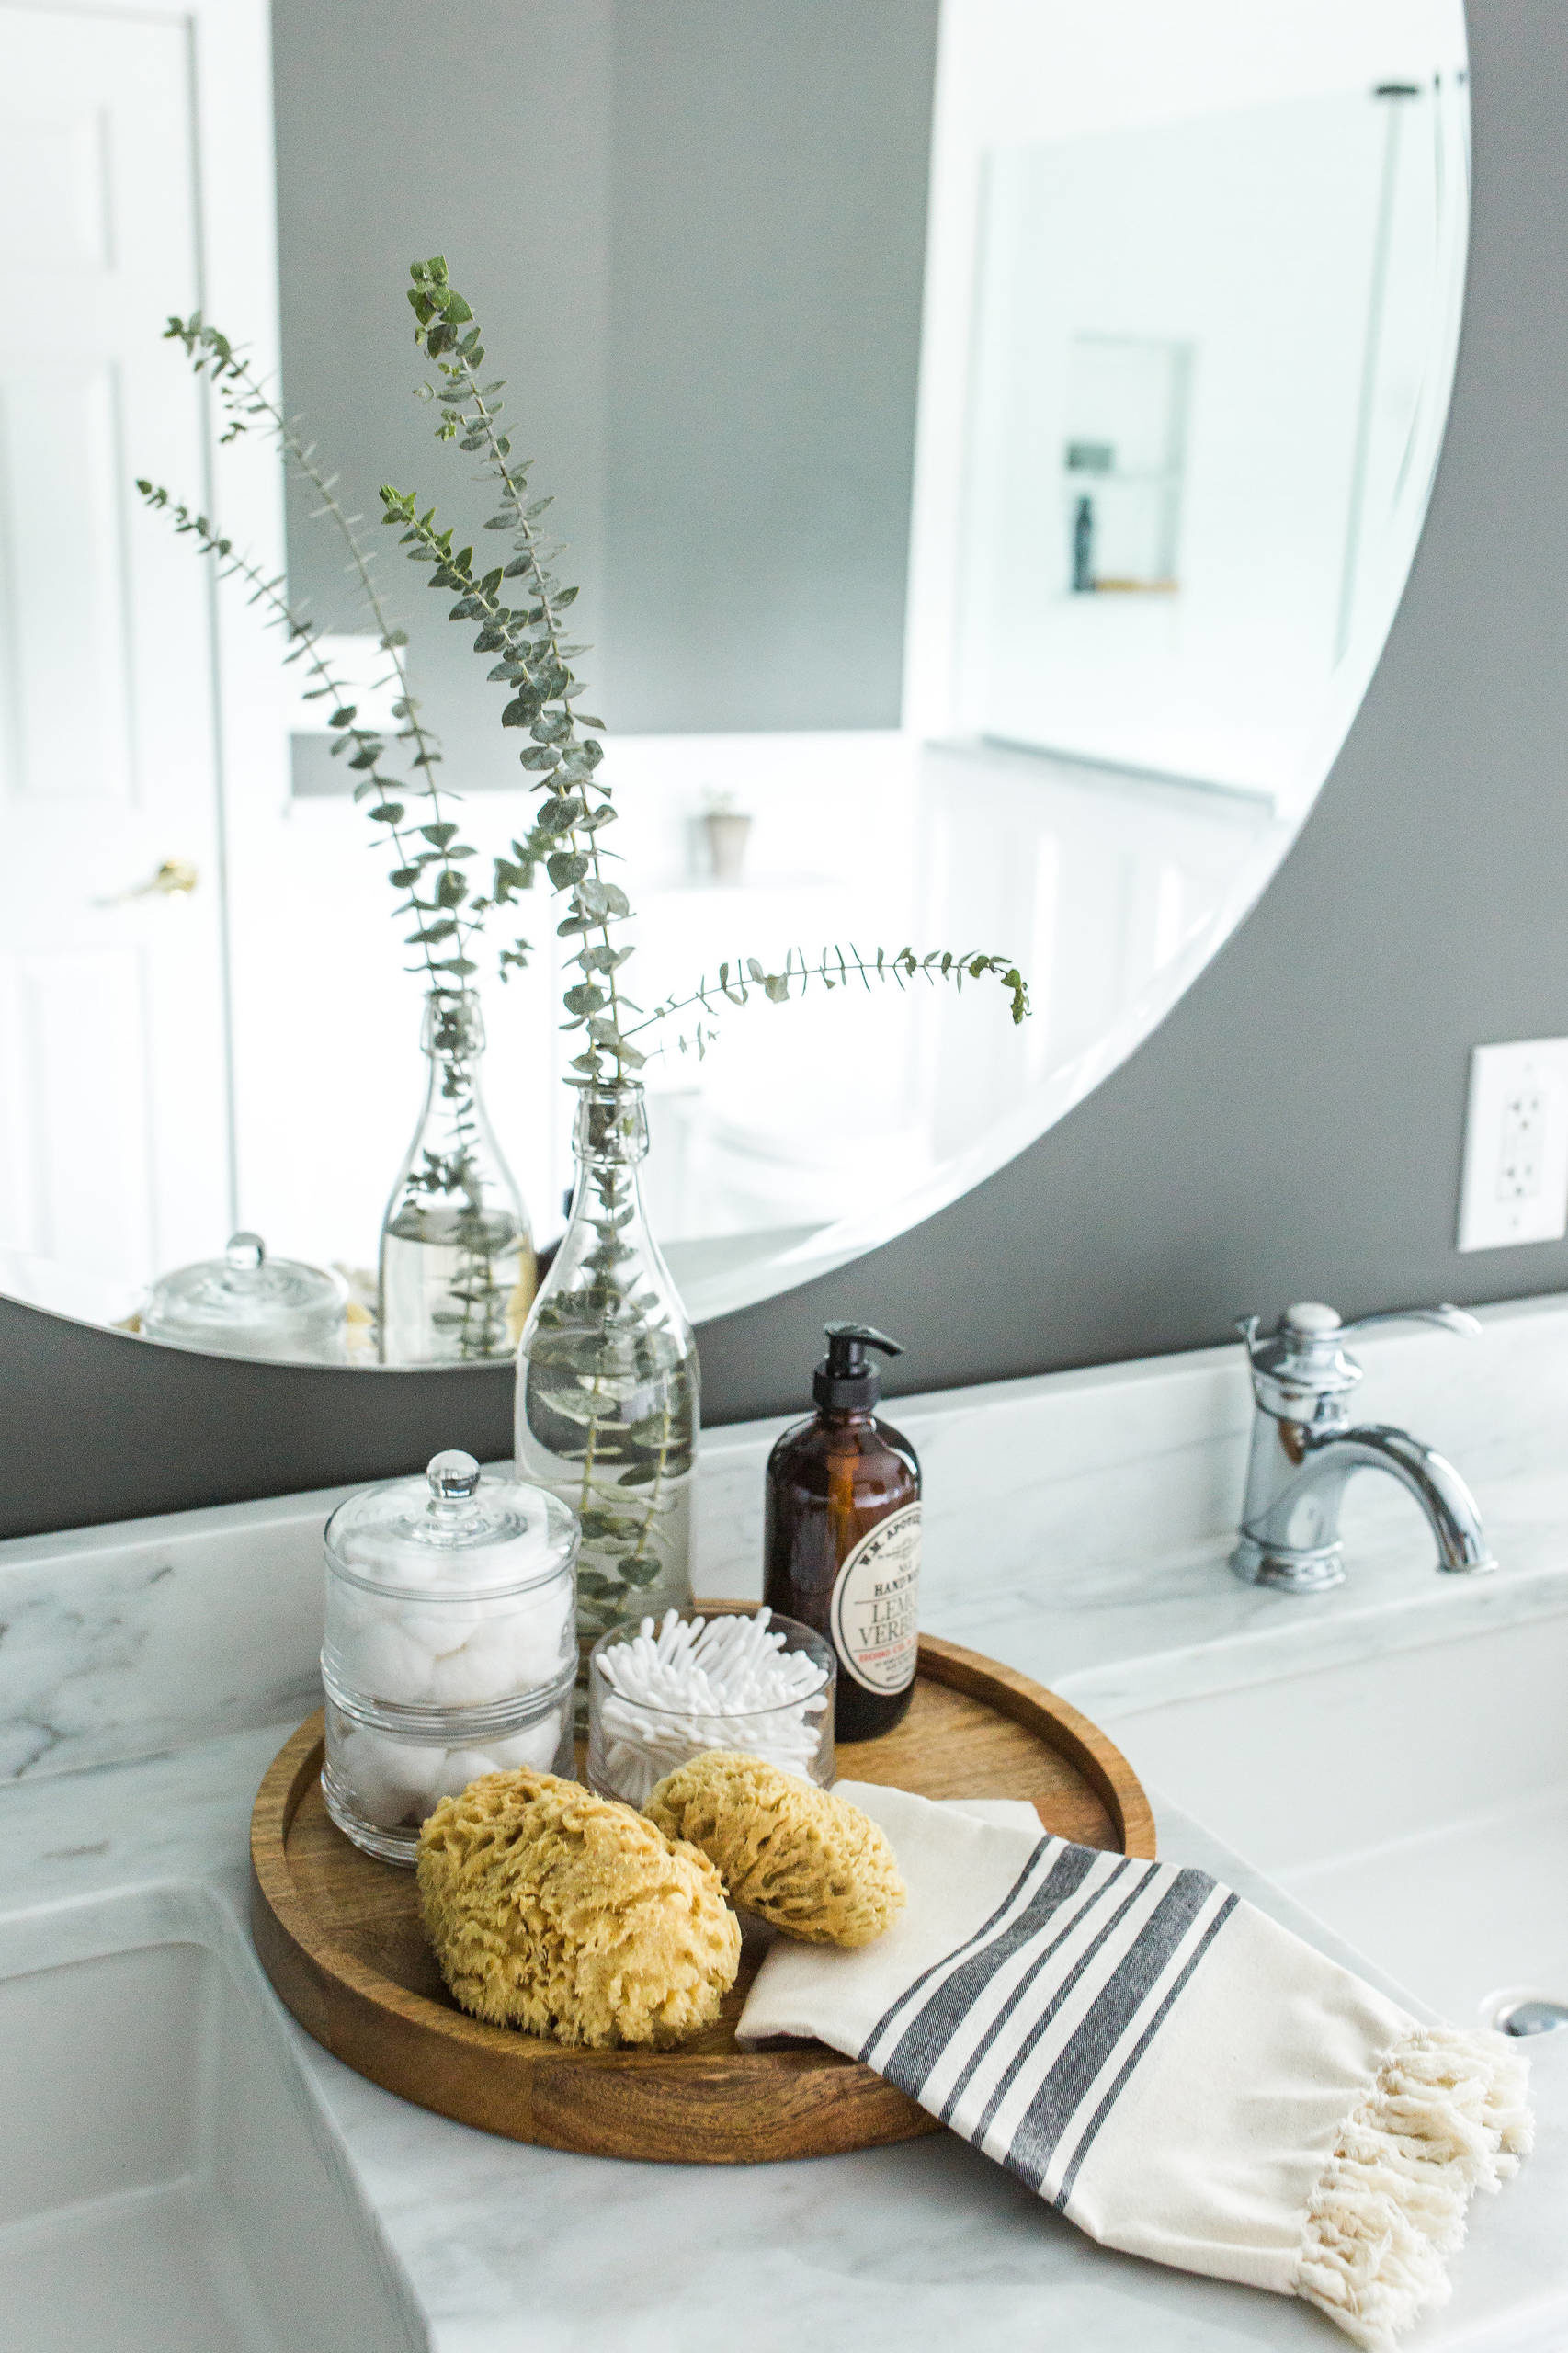 How to Transform Your Bathroom into a Relaxing Retreat